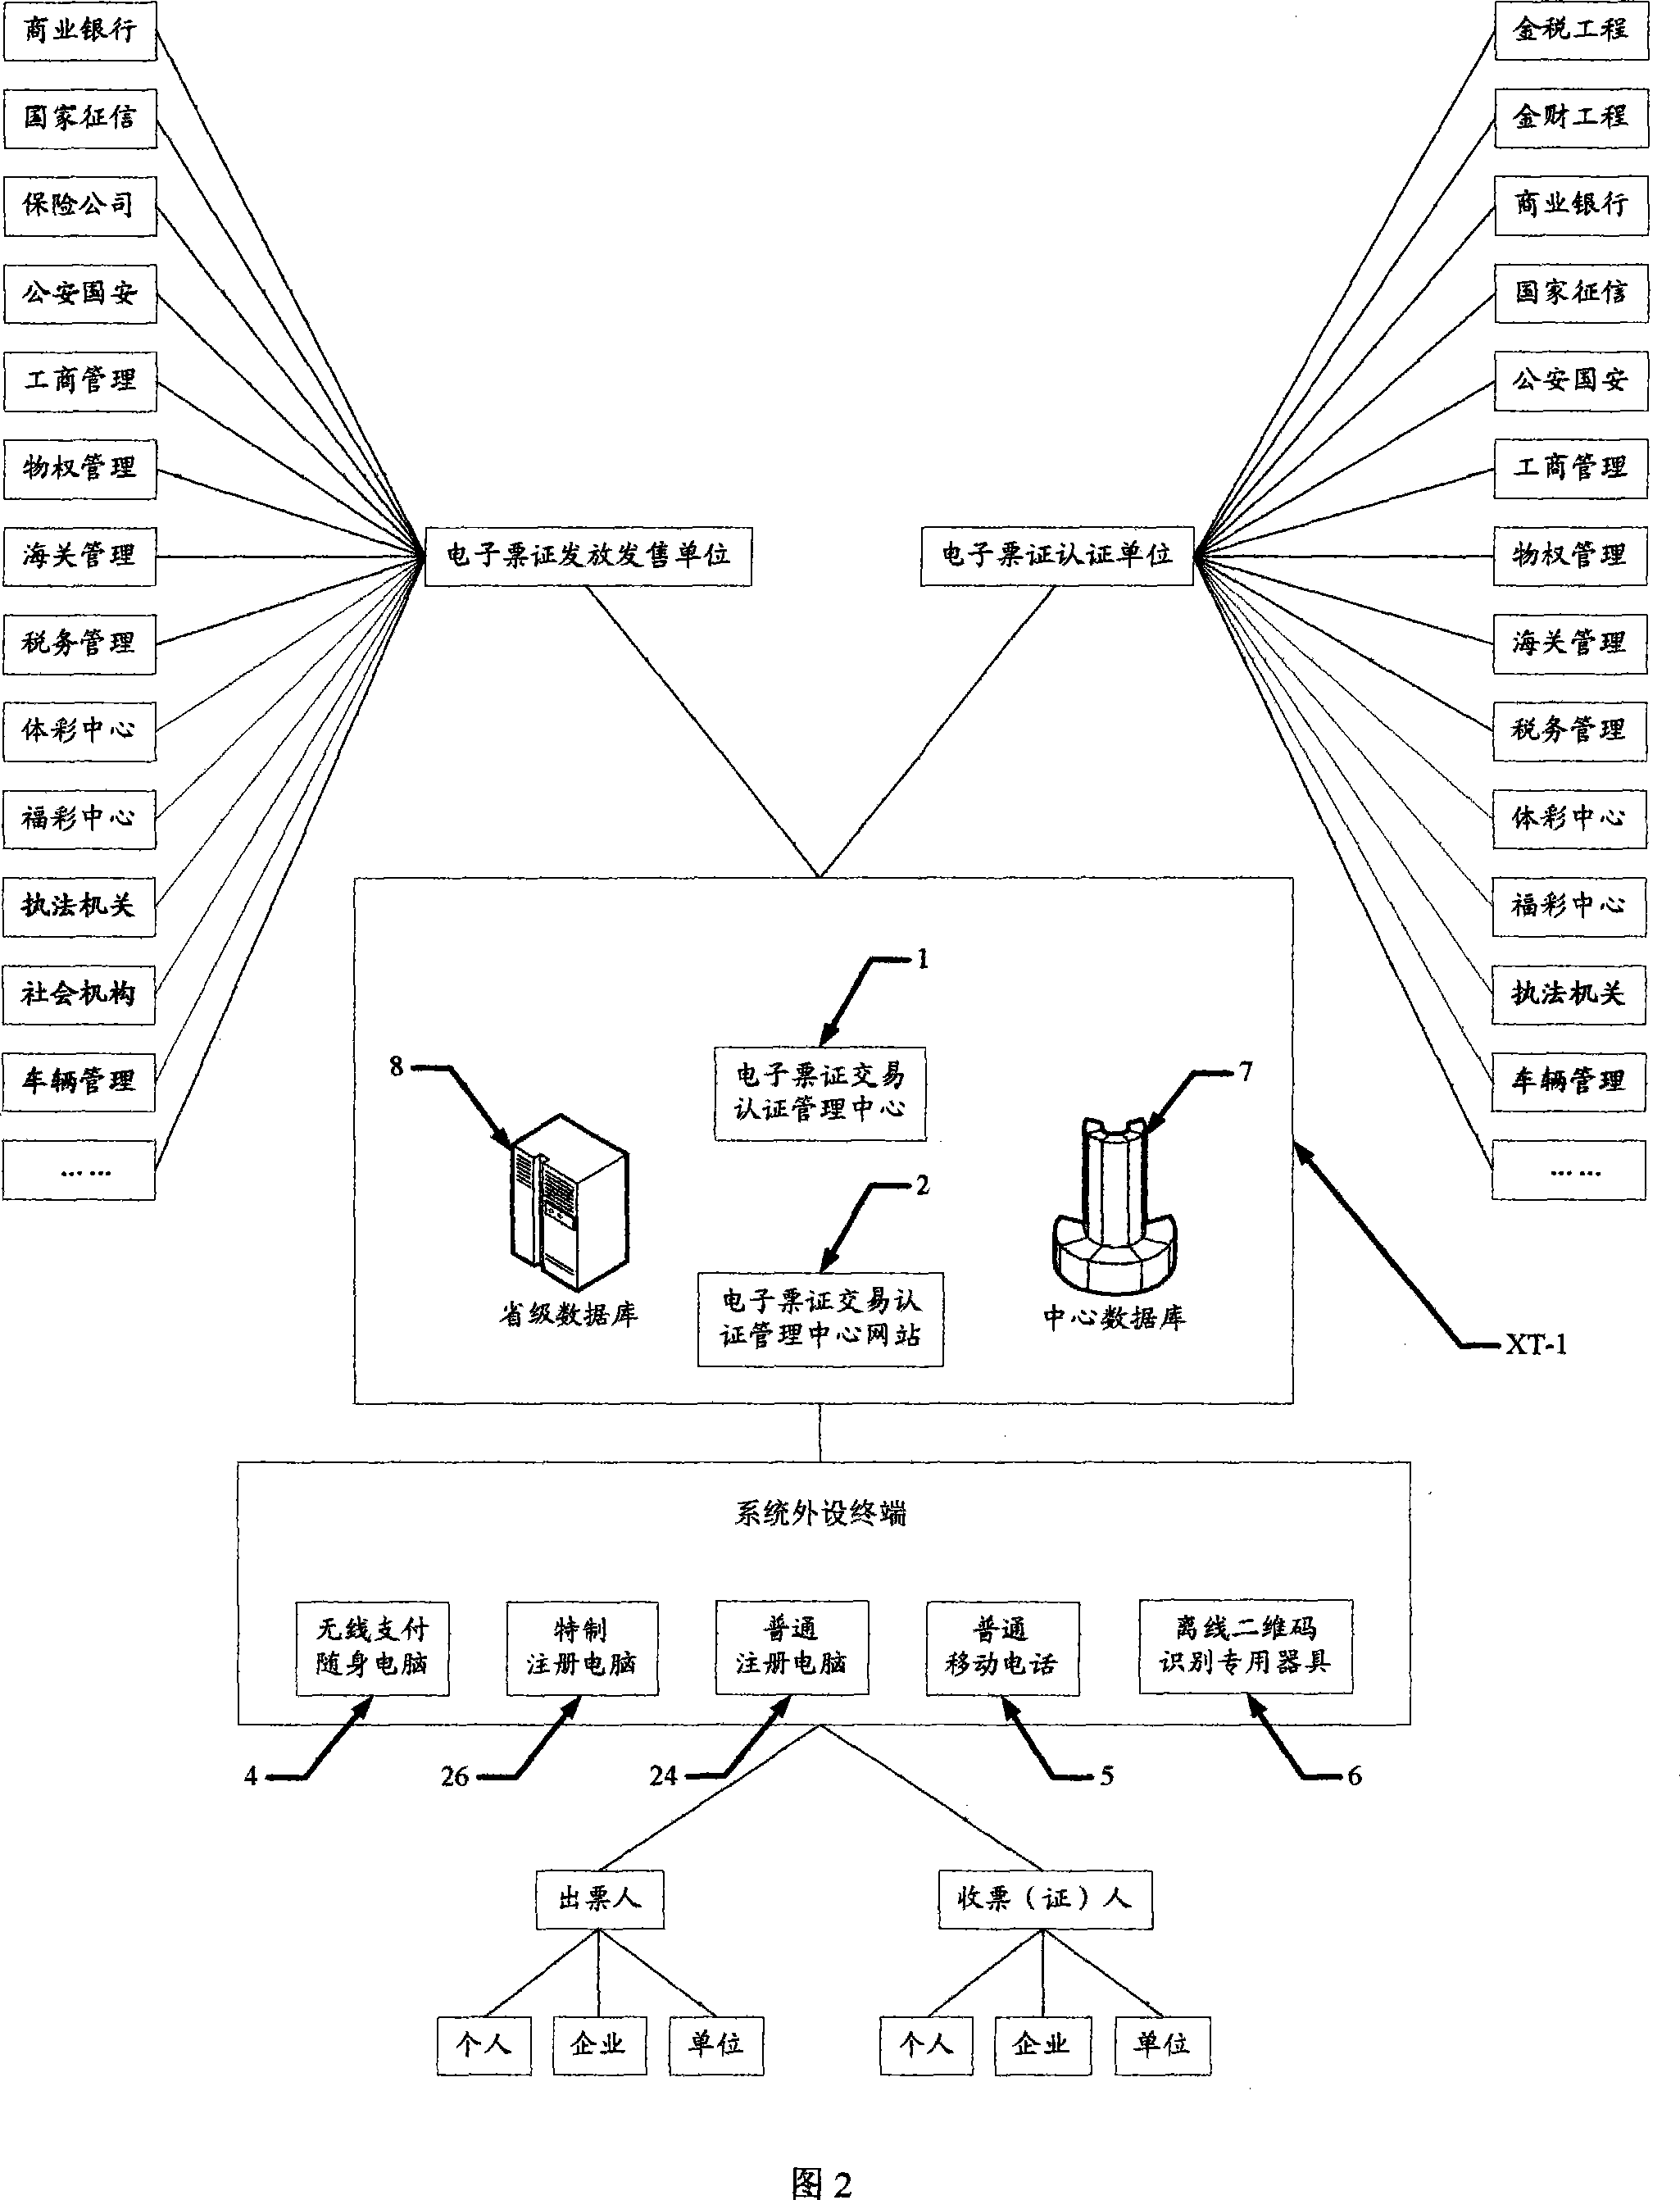 Method for managing electronic ticket trade certification its carrier structure, system and terminal